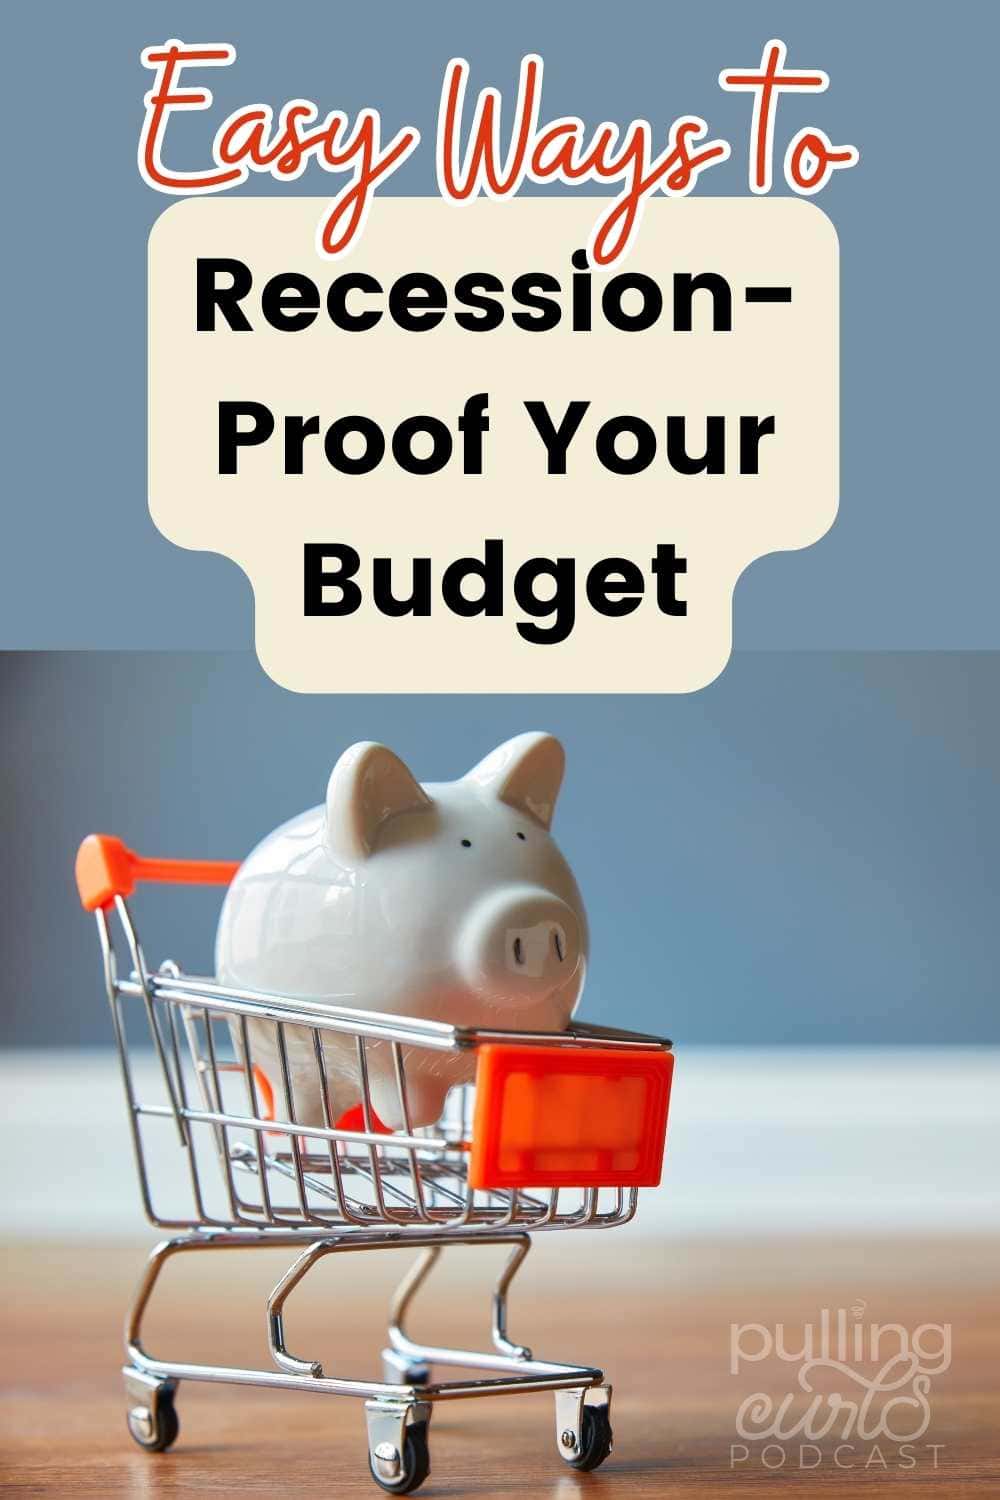 Take control of your family budget! Recession-proof your family budget has the tools and guidance to help you make the most of your finances and live a stress-free life. Get started now and ! via @pullingcurls